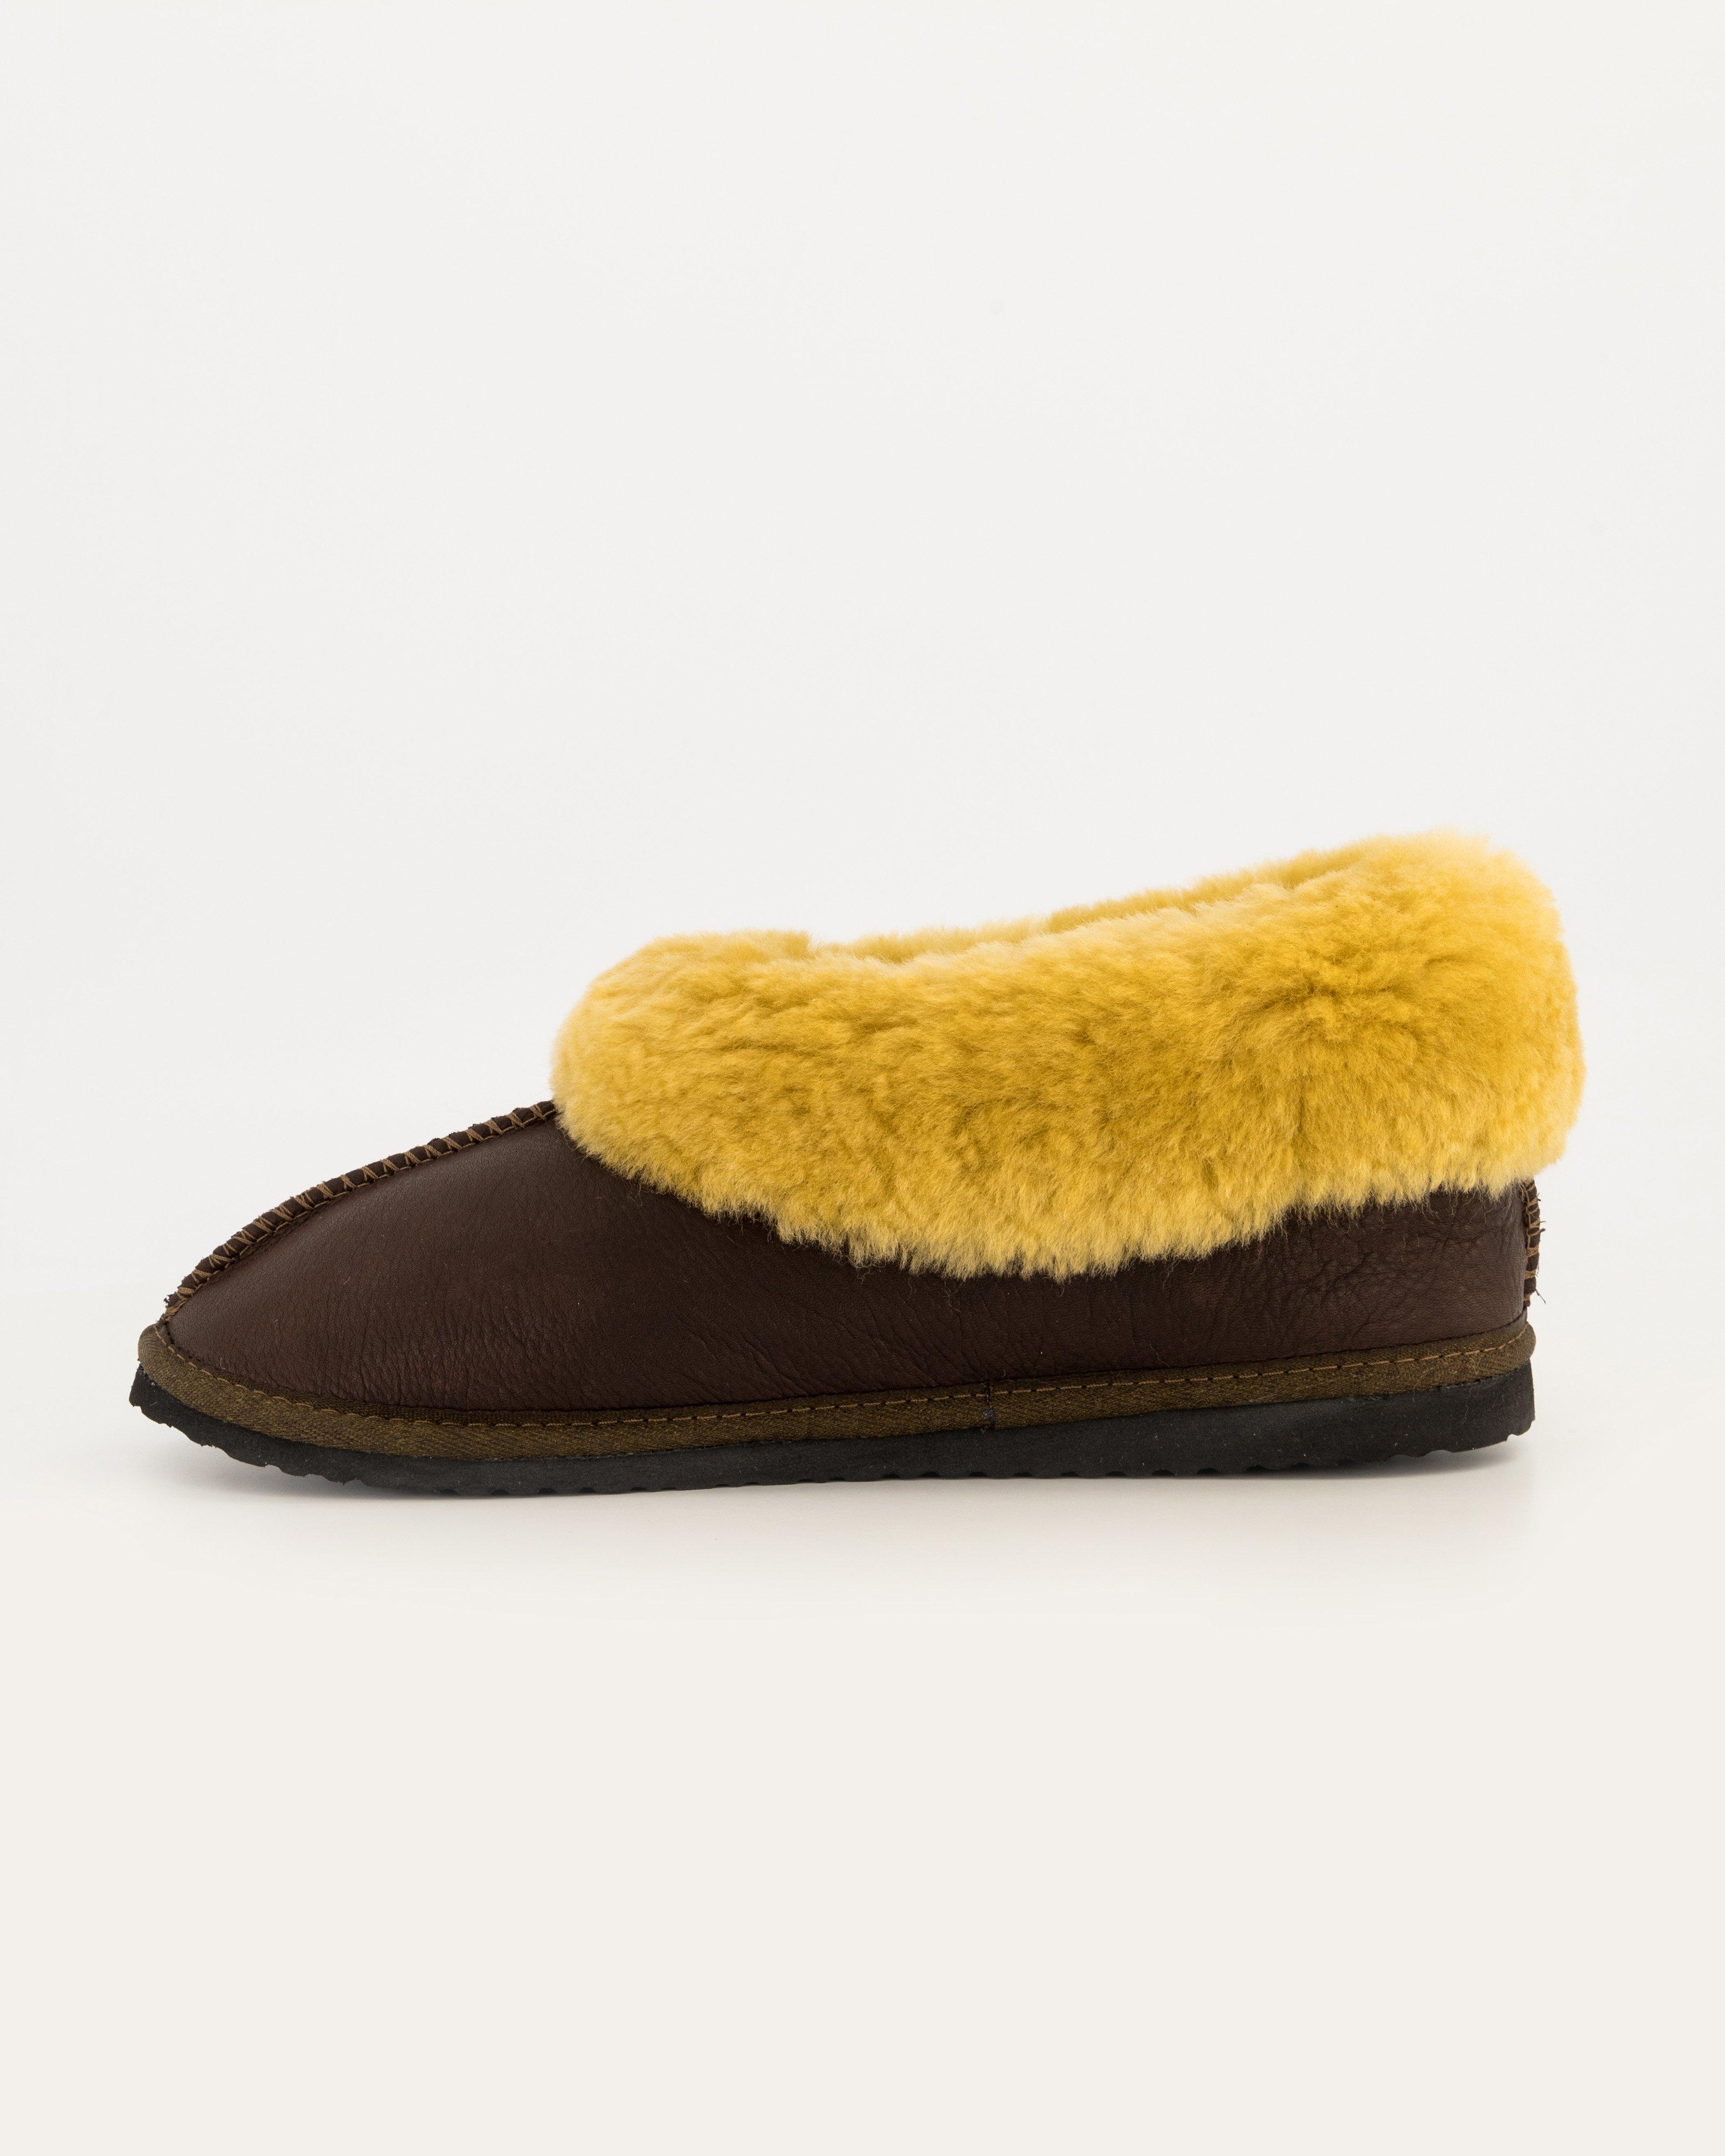 Cape Union Men's Sheepswool Classic Slippers